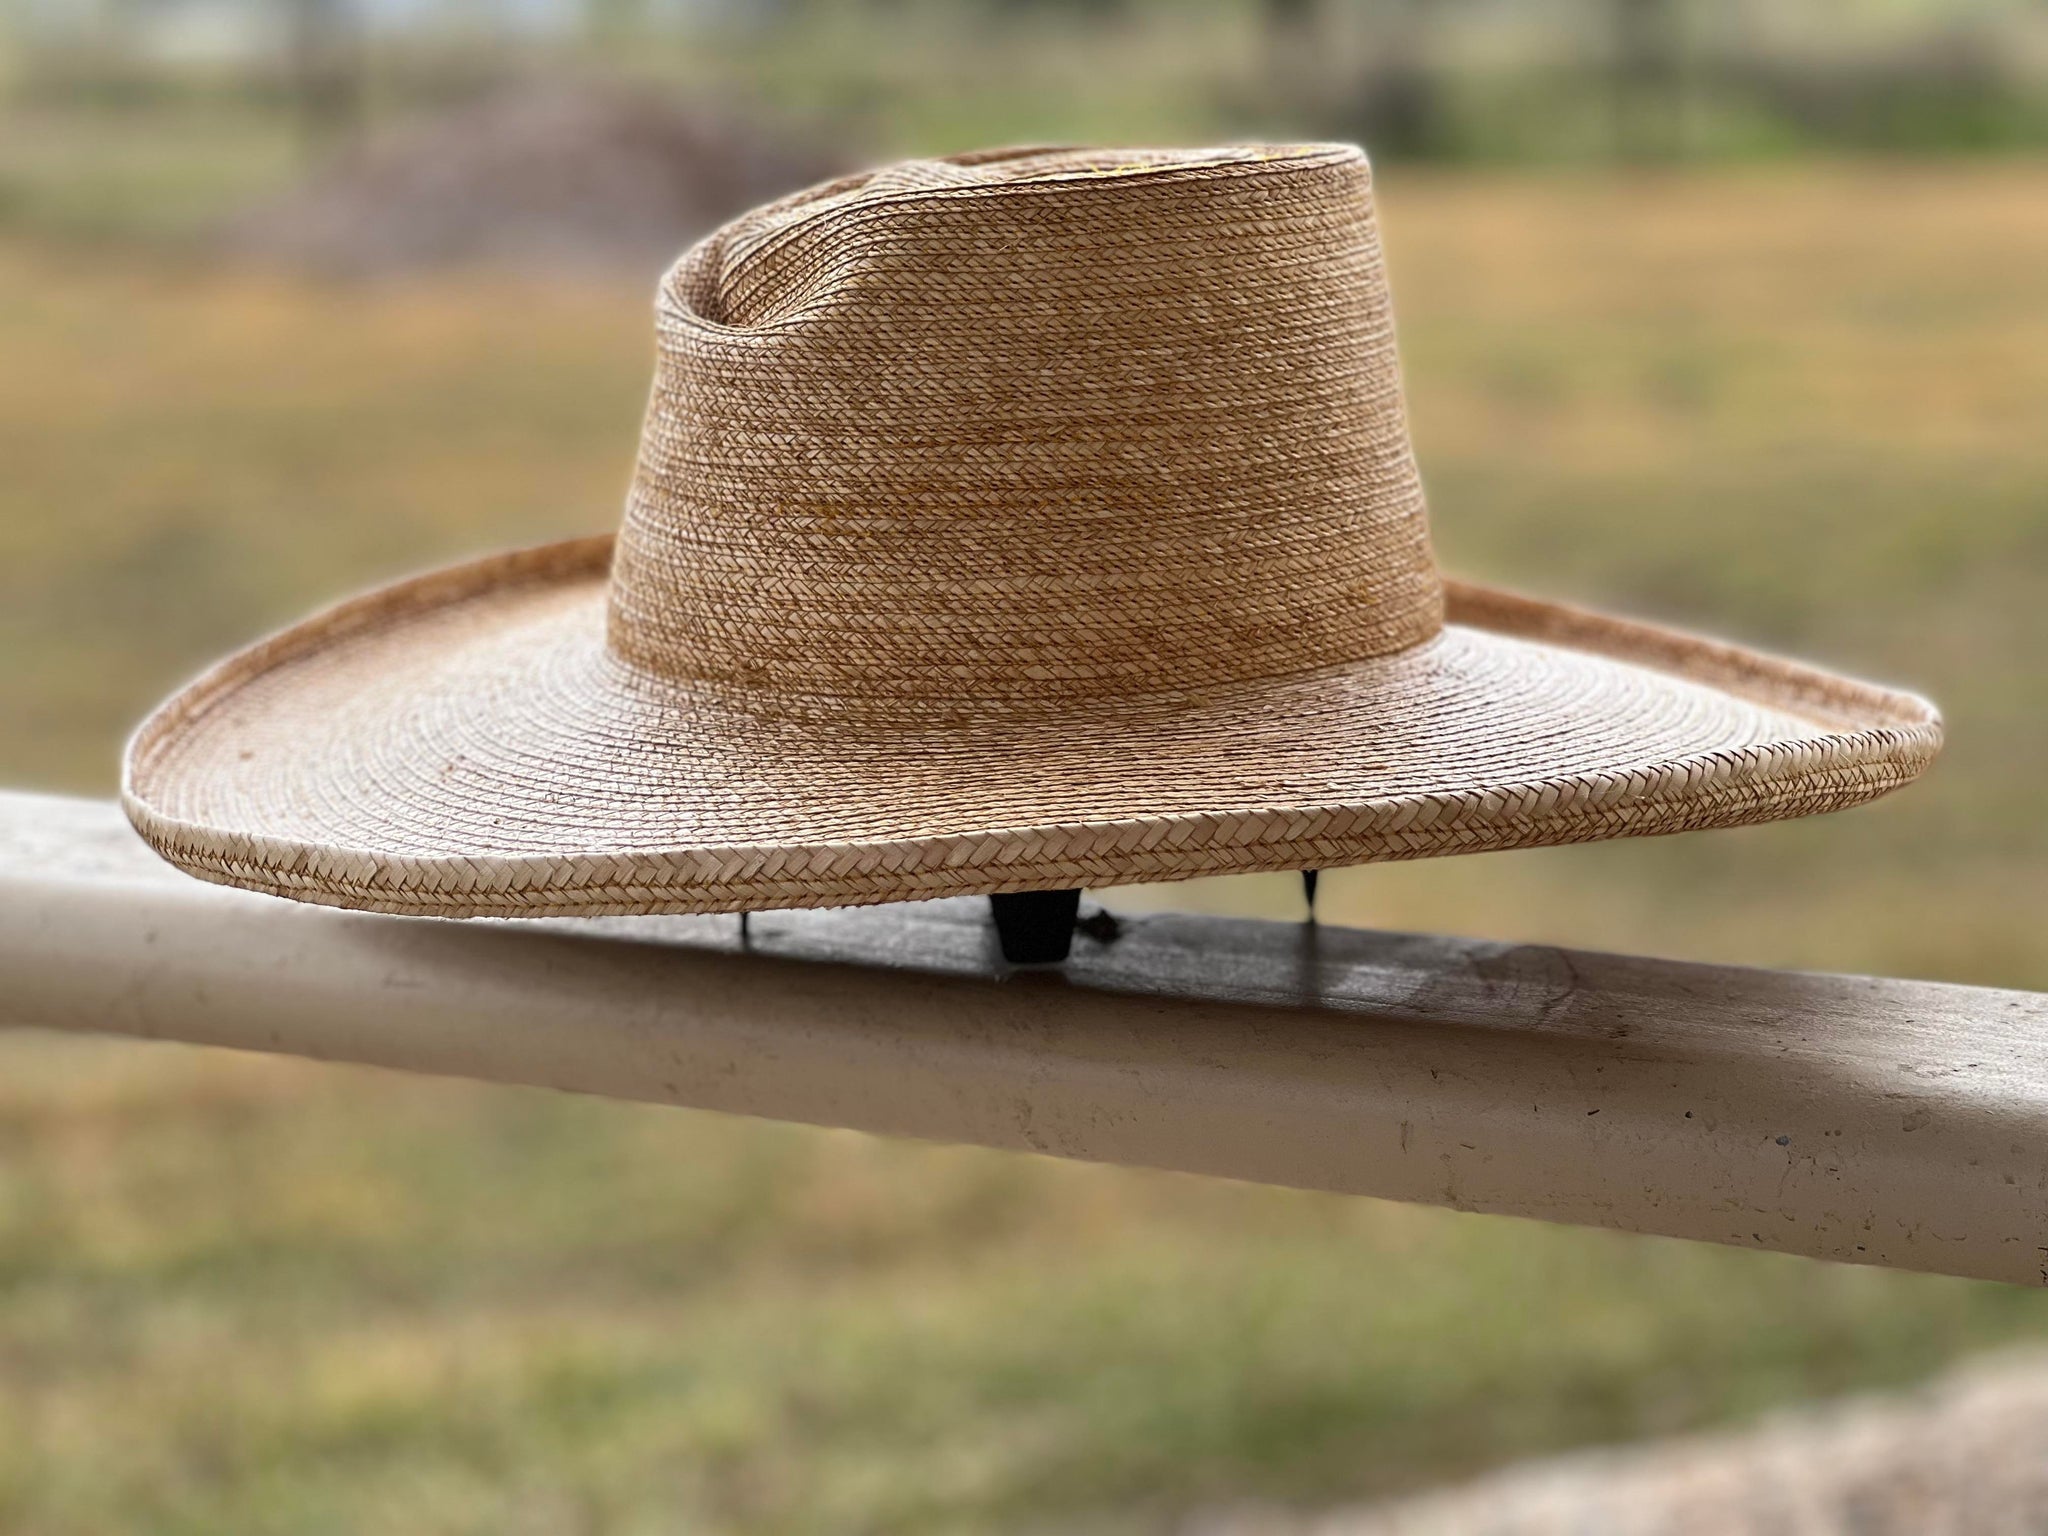 Jaxonbilt_Hats_are_Australian_made_palm_leaf_hats_and_crossbred_hats_for_cowgirls_and_cowboys_with_wide_brims_for_sun_protection_5”_brim_trim_on_edge_wide_crown_band_pencil_curl_brim_shape_snail_shell_crown_shape_dark_oak_5”_brim